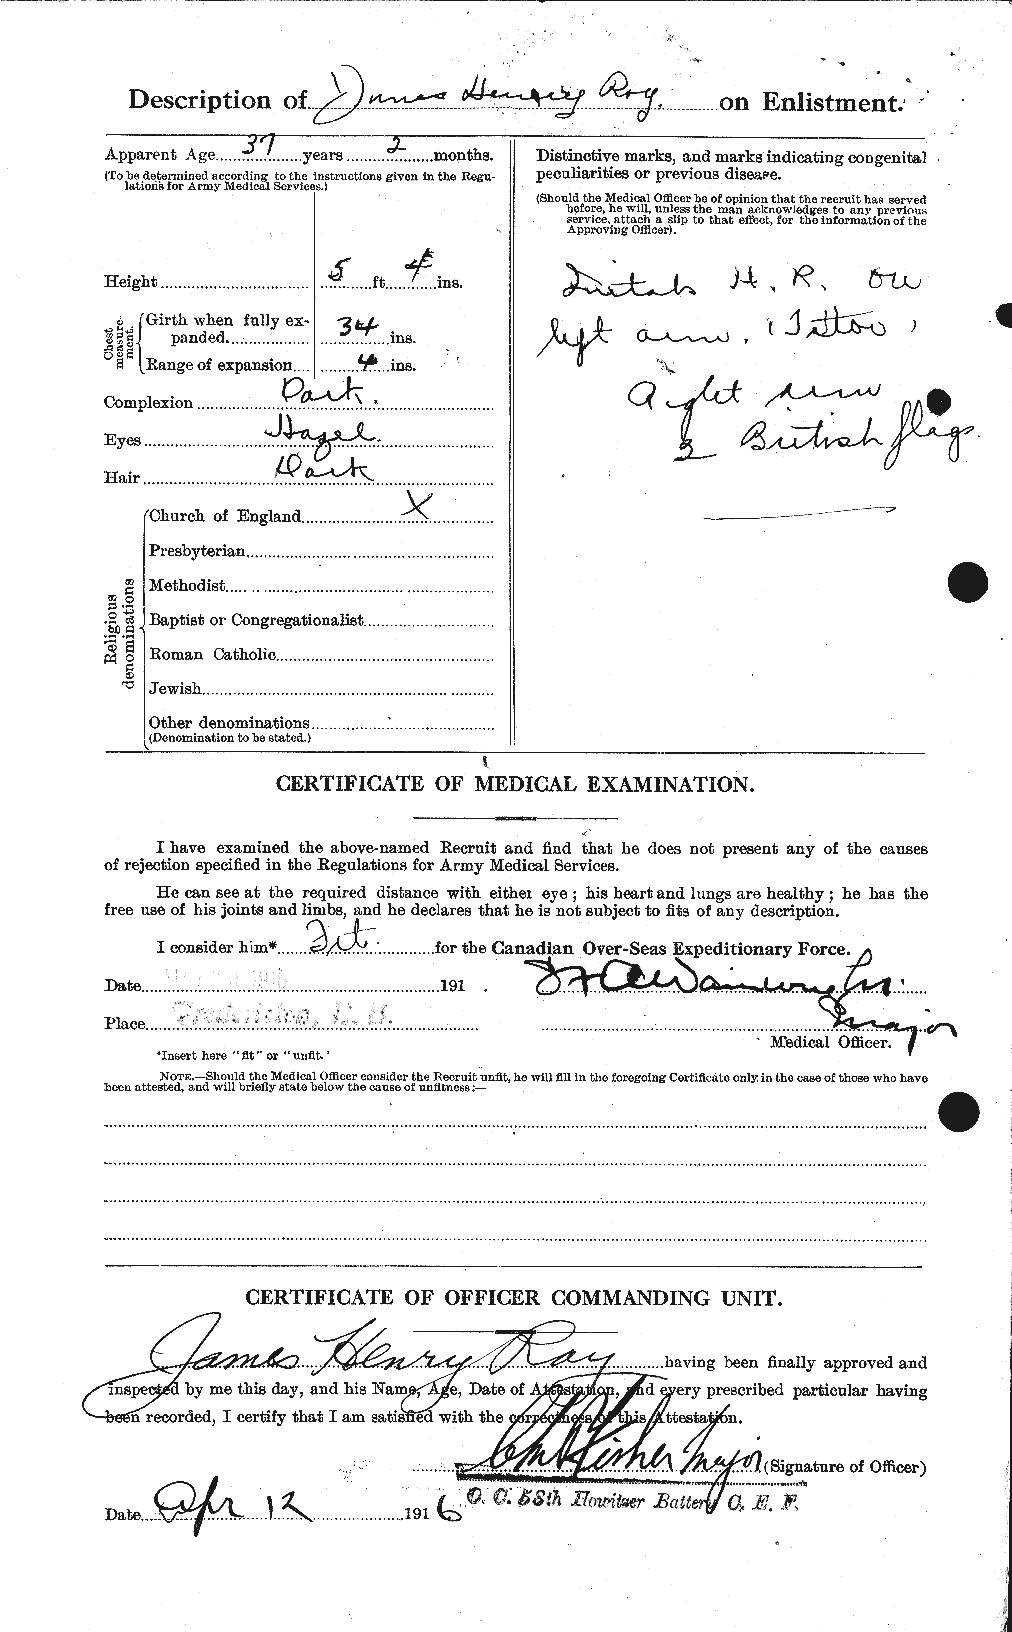 Personnel Records of the First World War - CEF 616724b